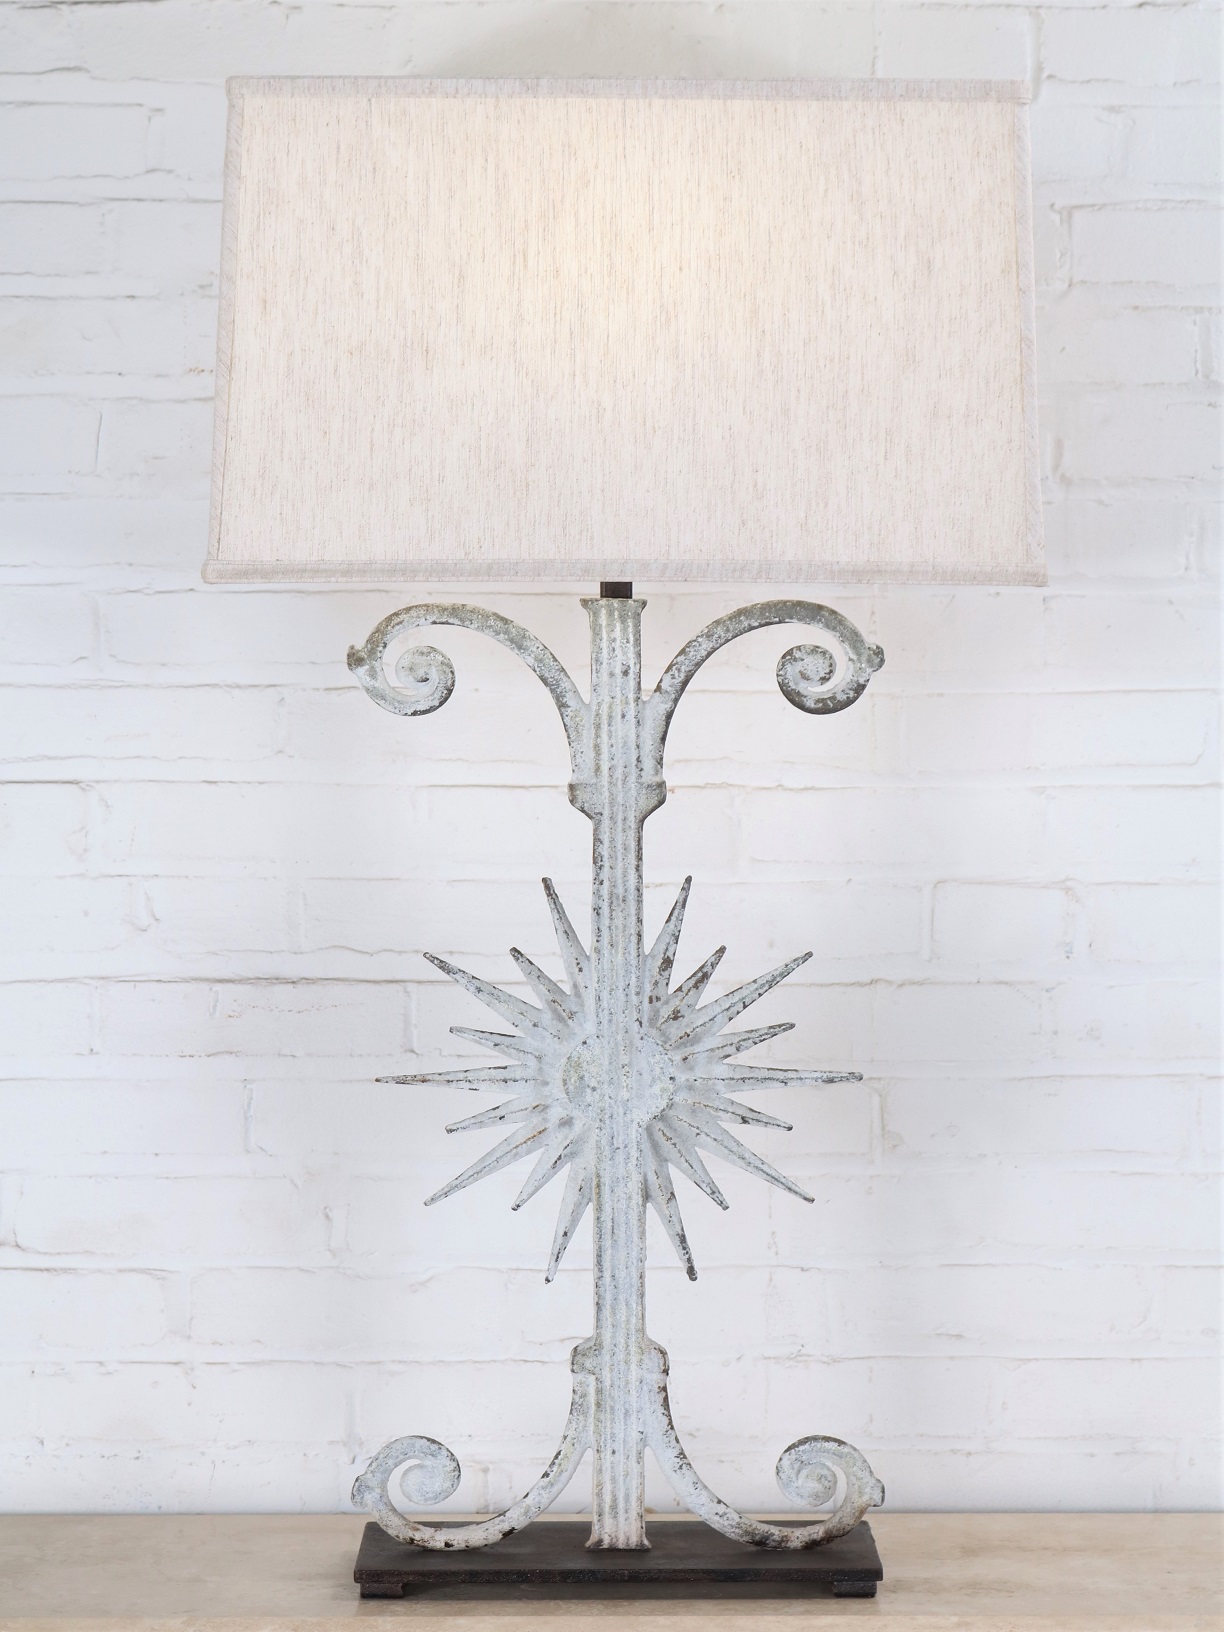 Ferro Designs LLC custom iron table lamp with a white, distressed finish and a dark iron base. Paired with a 19 inch rectangle linen lamp shade.